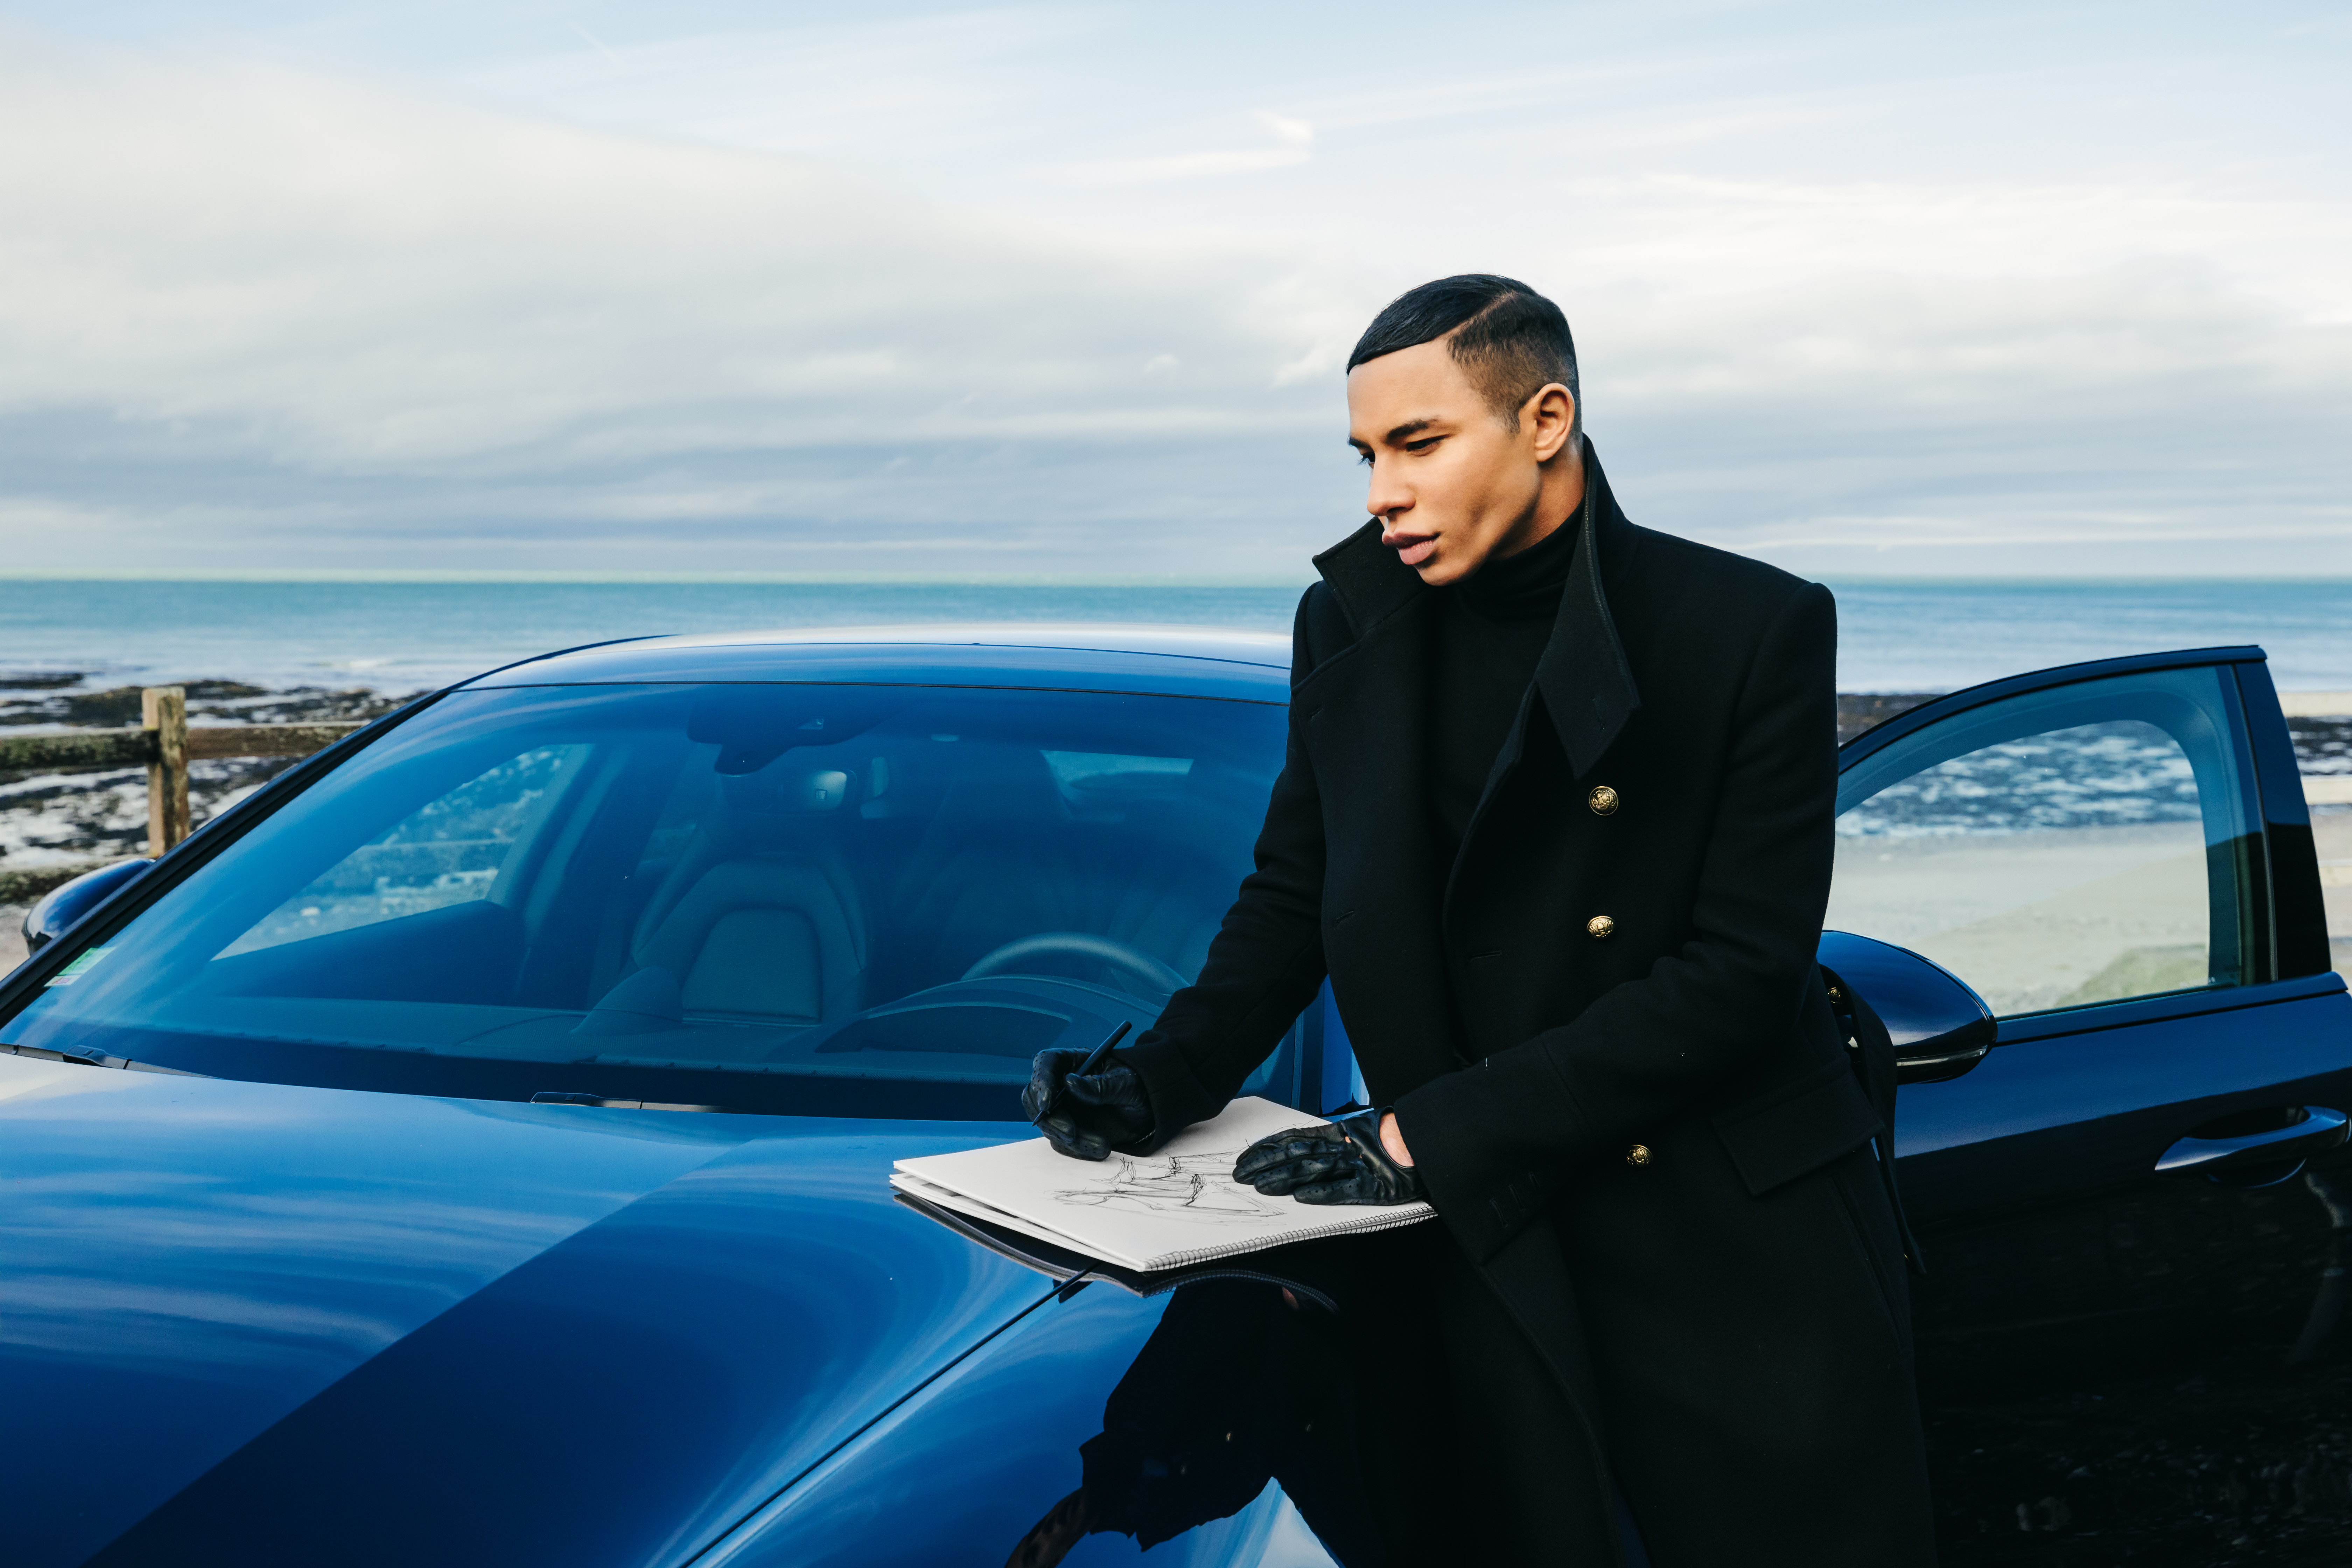 Olivier Rousteing sketching on the bonnet of a car